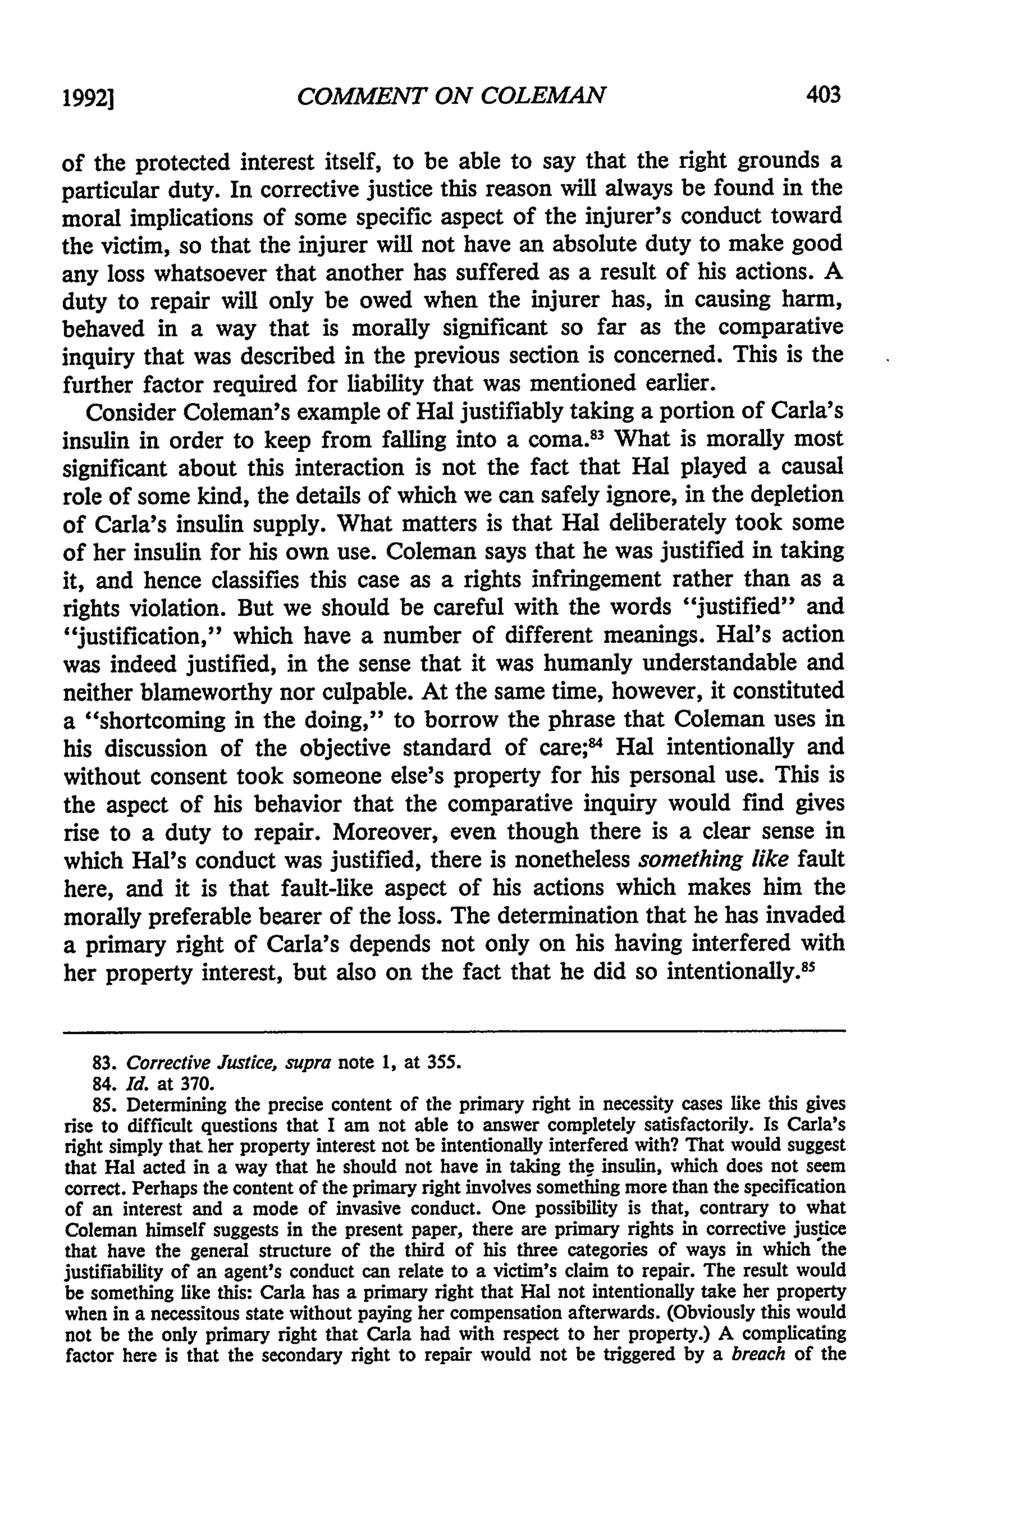 1992] COMMENT ON COLEMAN of the protected interest itself, to be able to say that the right grounds a particular duty.